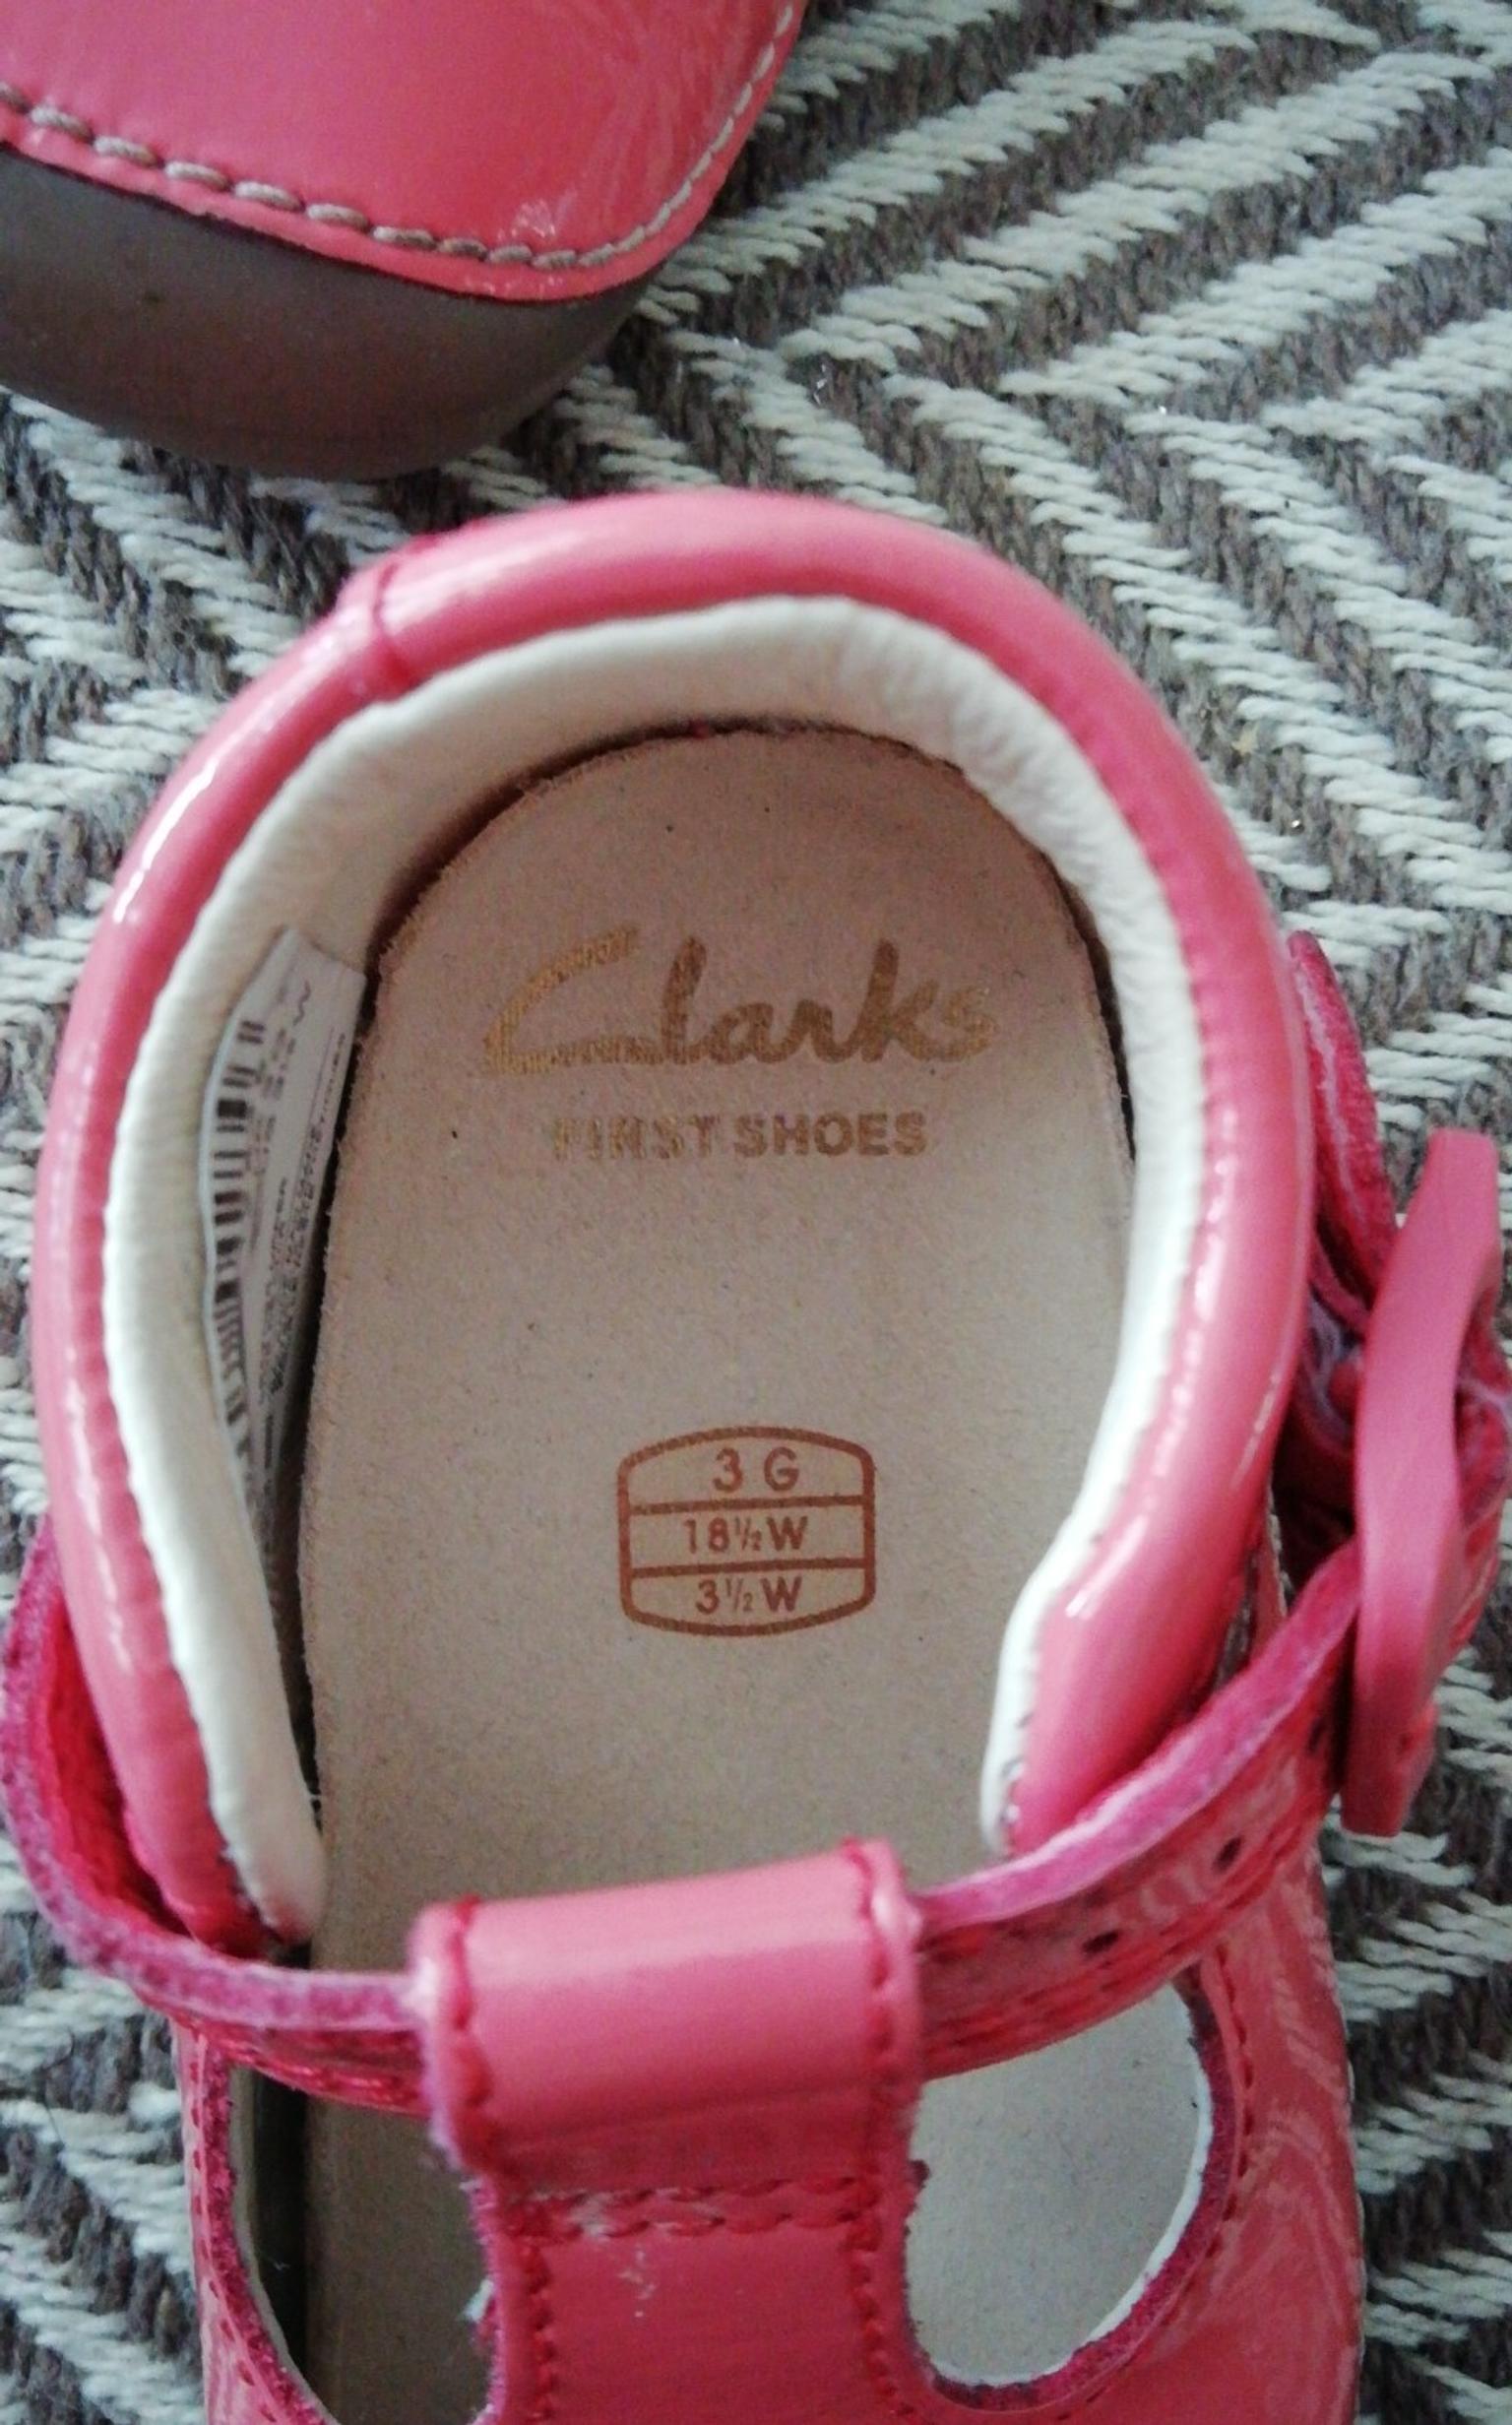 Girls Clarks shoes size 3G in TS25 